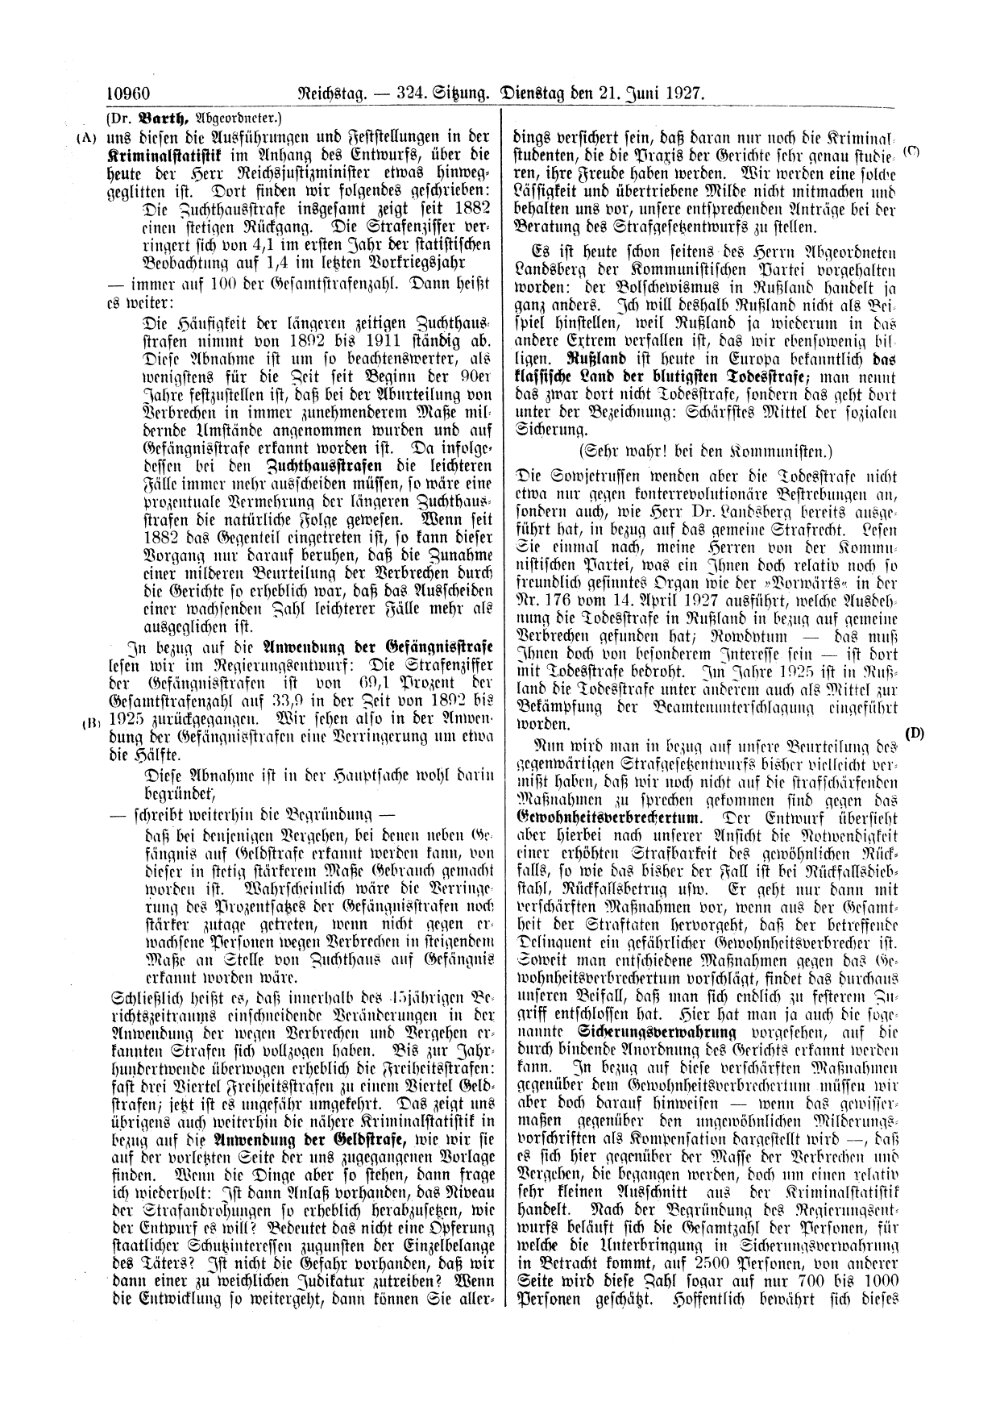 Scan of page 10960